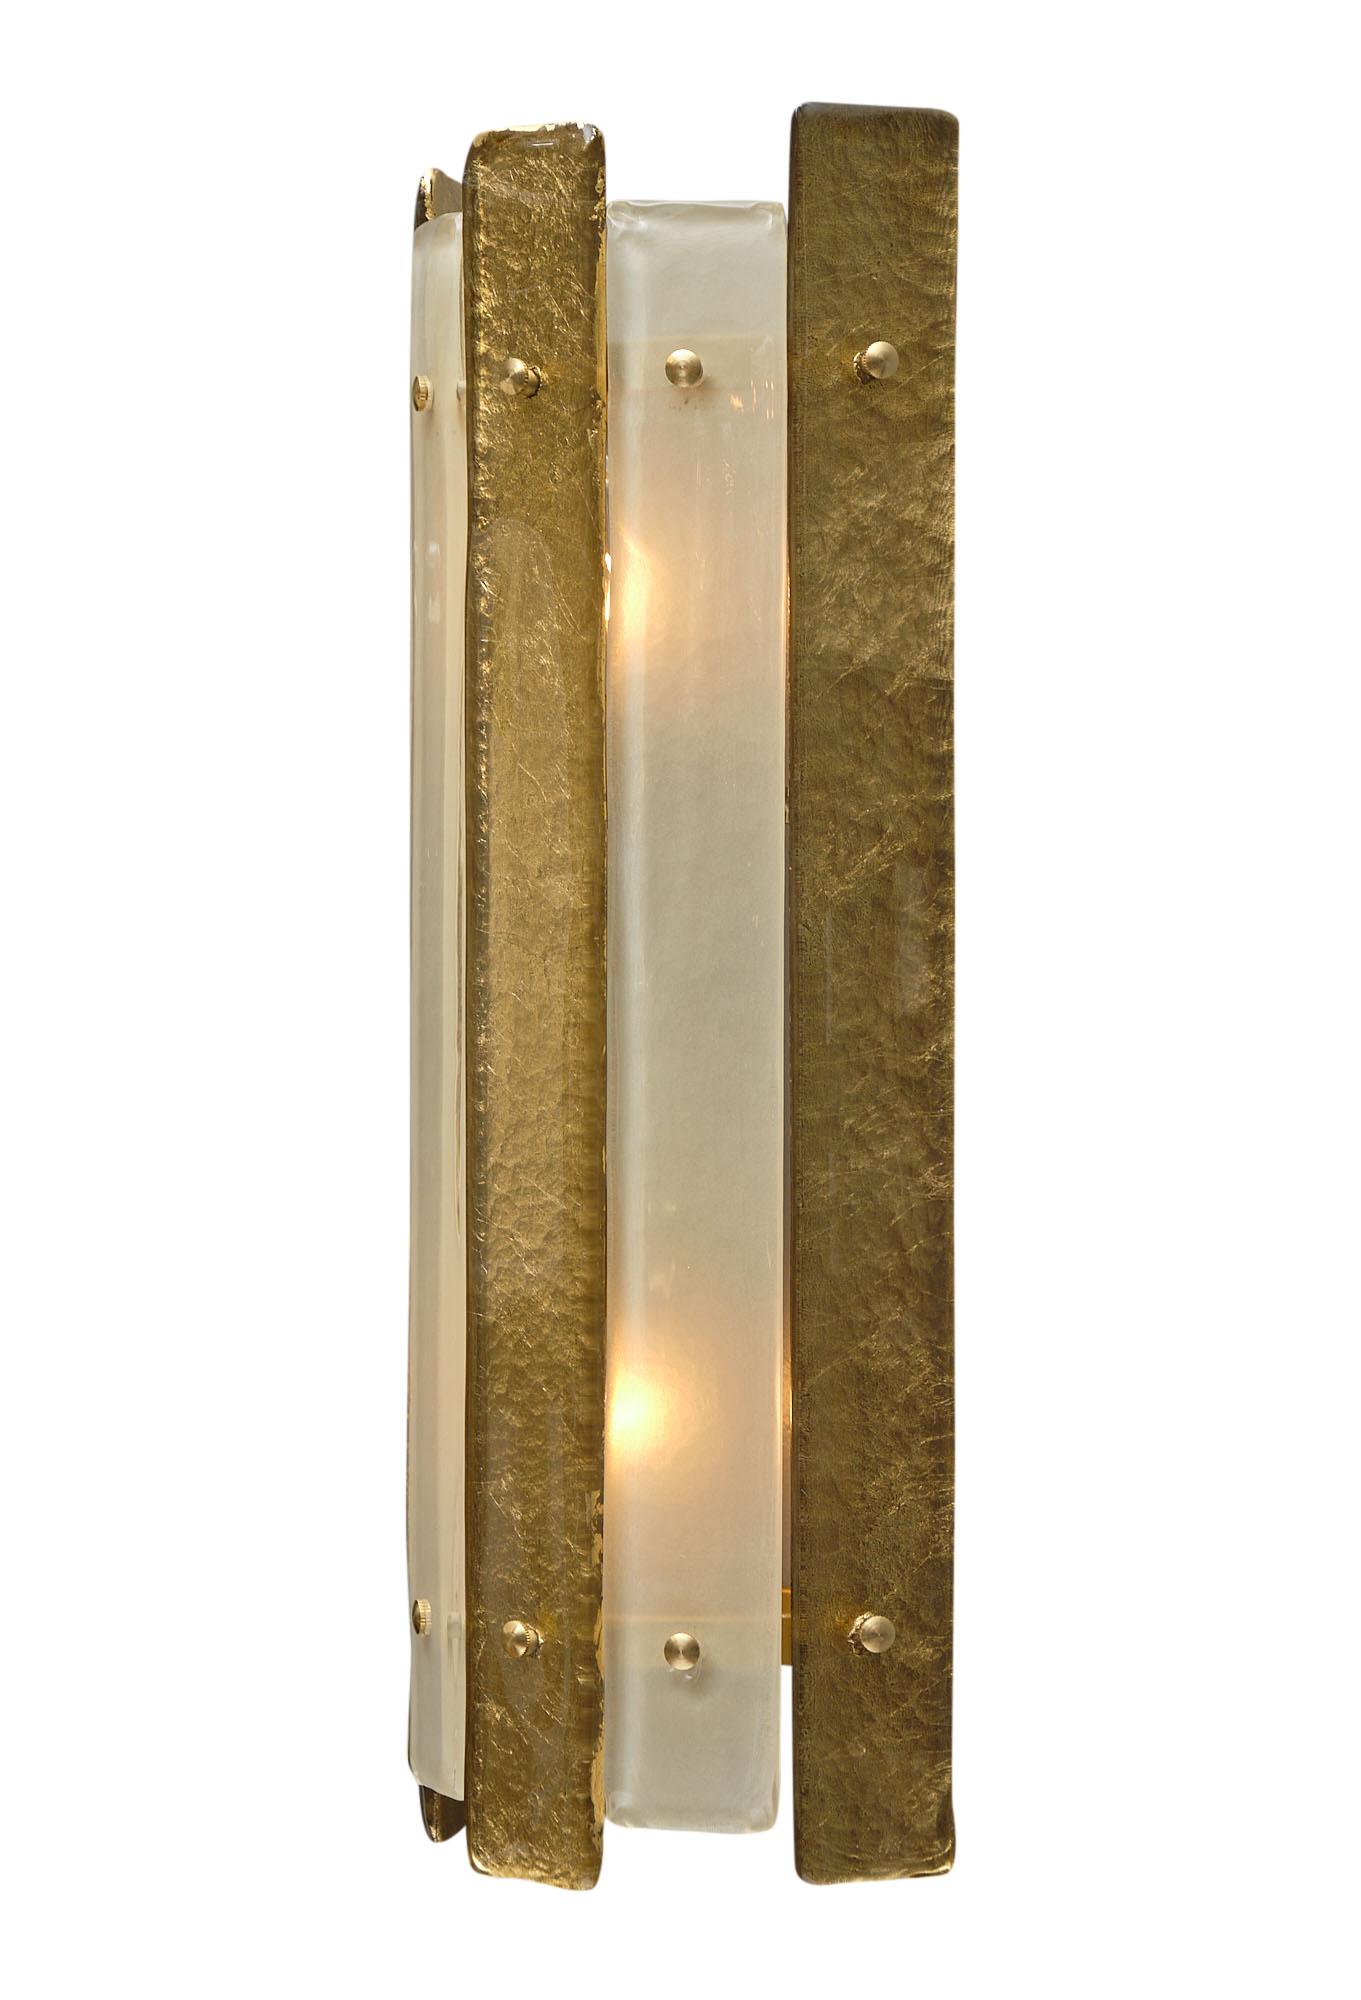 Pair of Murano sconces from Venice, Italy. These sconces feature hand-blown alternating blades of frosted and gold leaf glass attached to a brass structure. They have been newly wired to fit US standards.

This pair is currently located at our